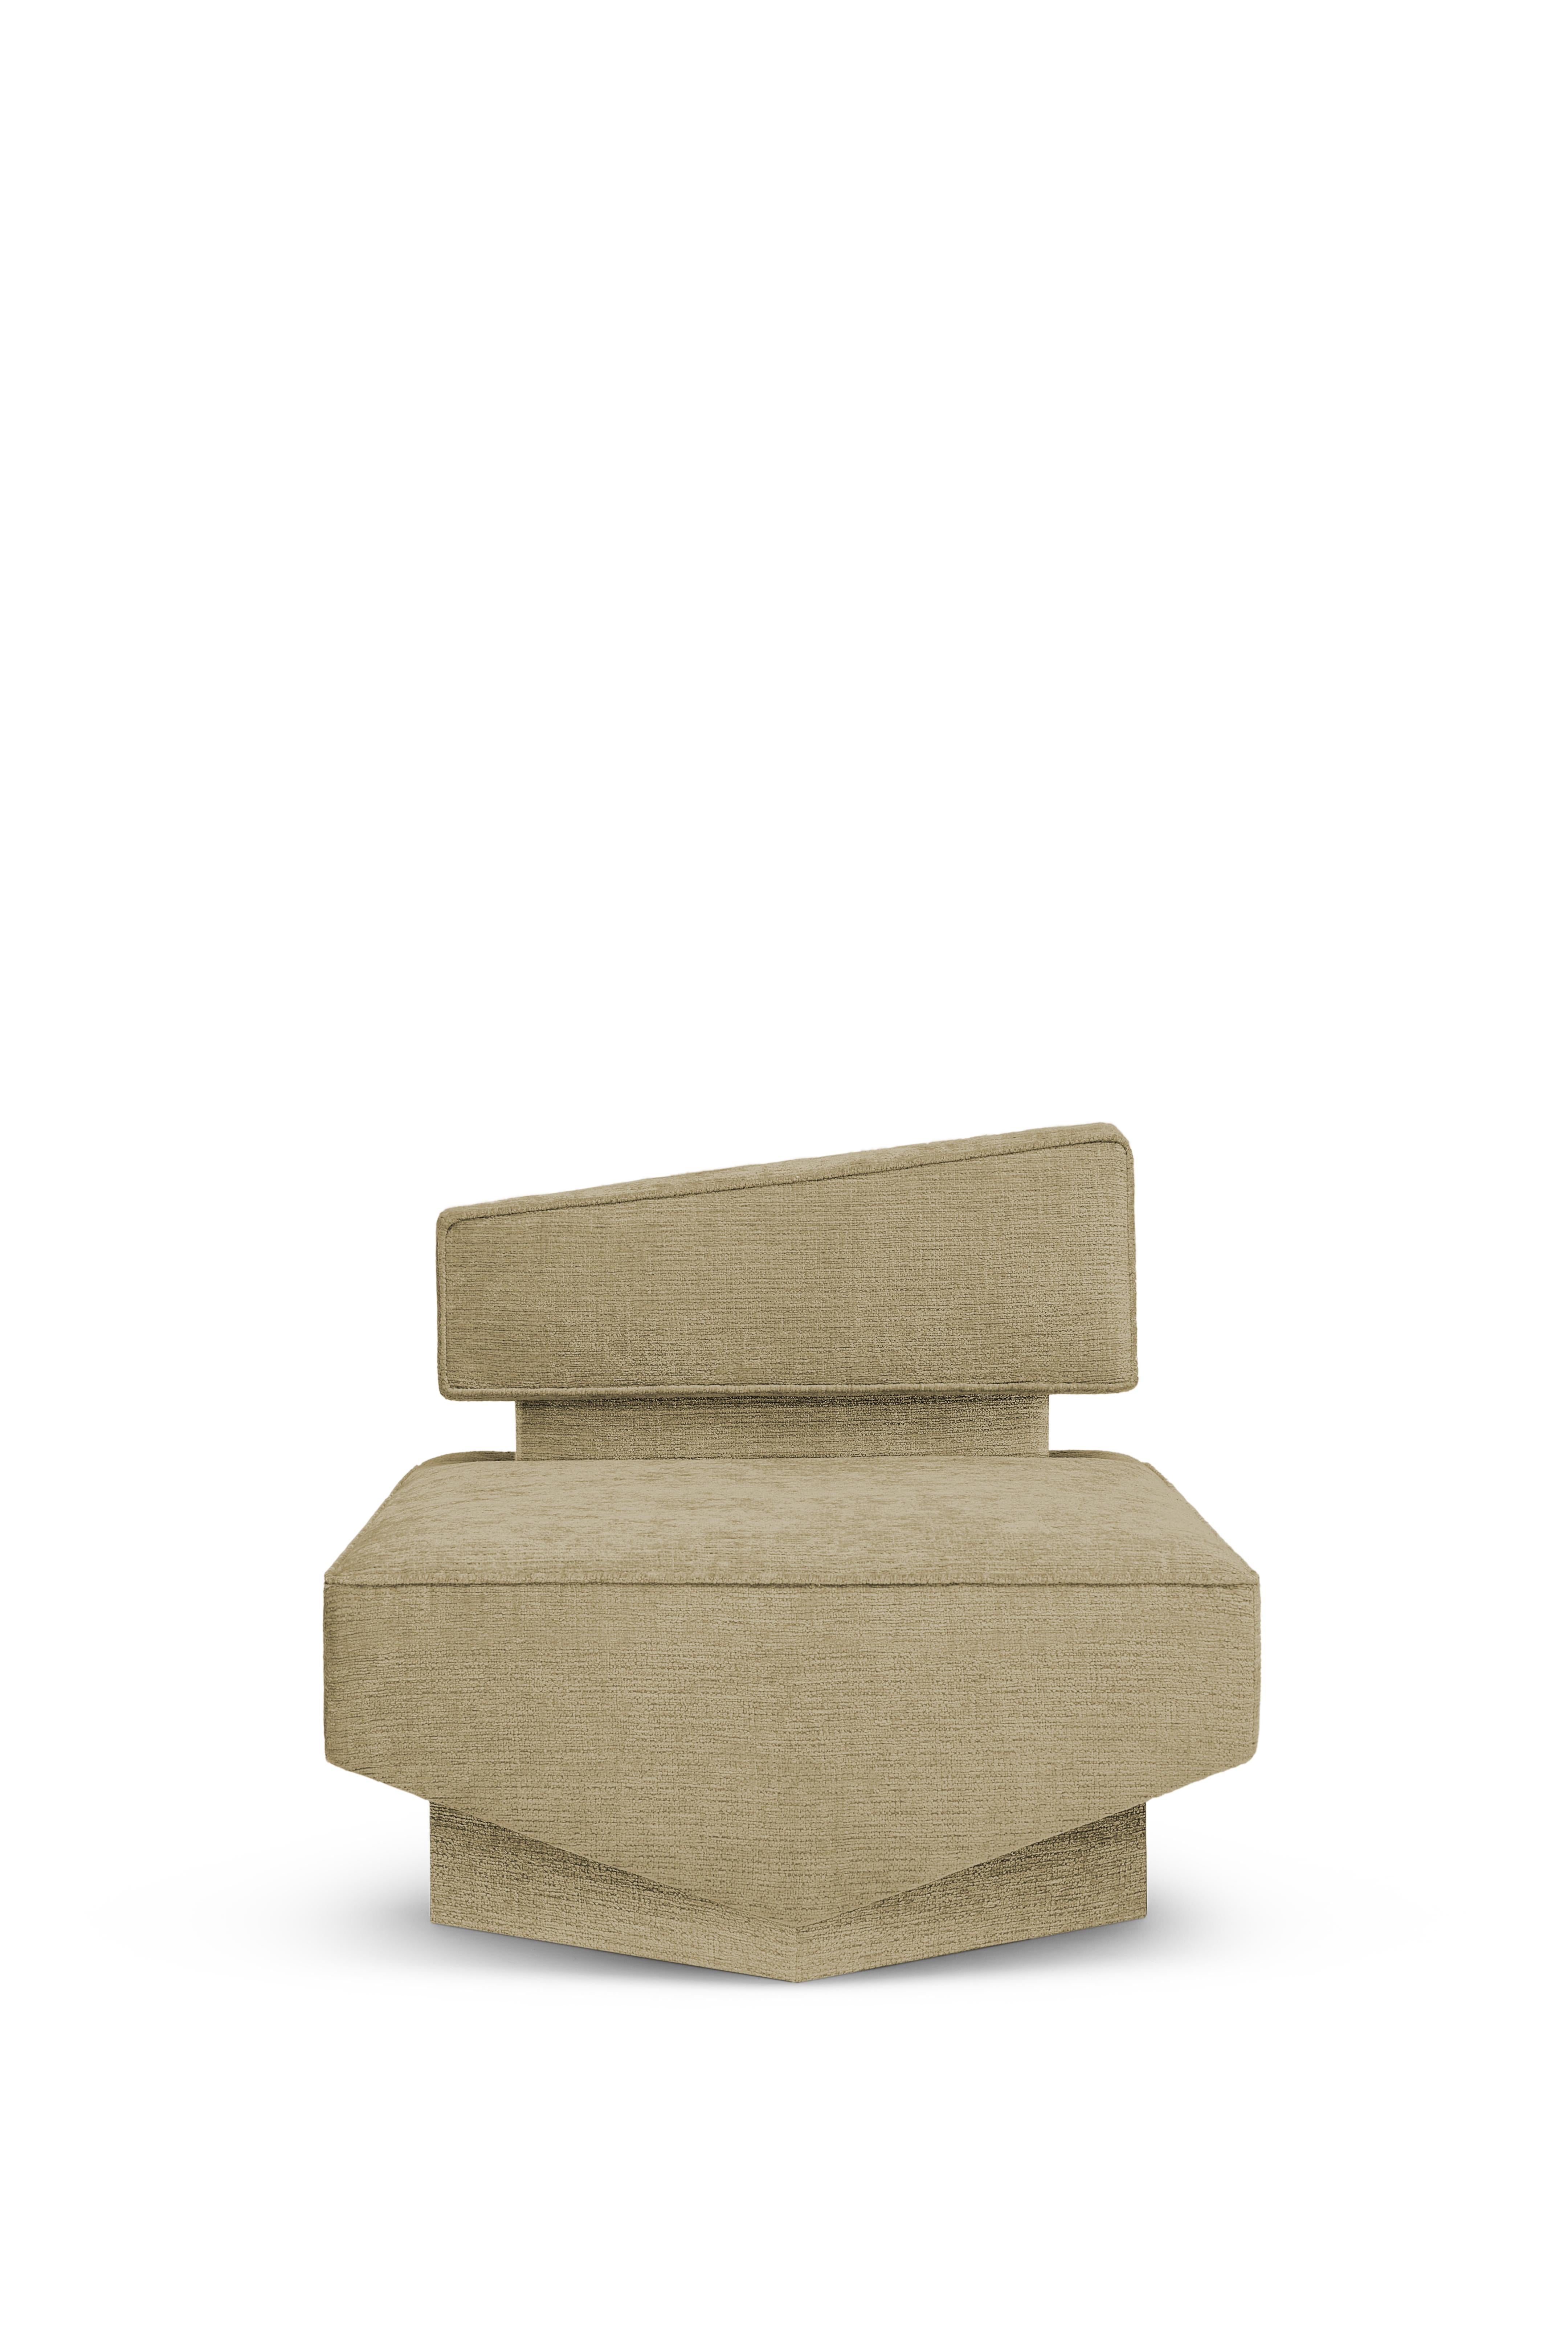 DIVERGENT Armchair by Marta Delgado Studio

Fabric: Vintage 
Color: Sand (more colors available)
Wood: American Walnut Veener

Dimensions:
Width: 31.5” 80 cm 
Depth: 32.7” 83 cm 
Height: 29.1” 74 cm
Seat Height: 15.7” 40 cm

Marta